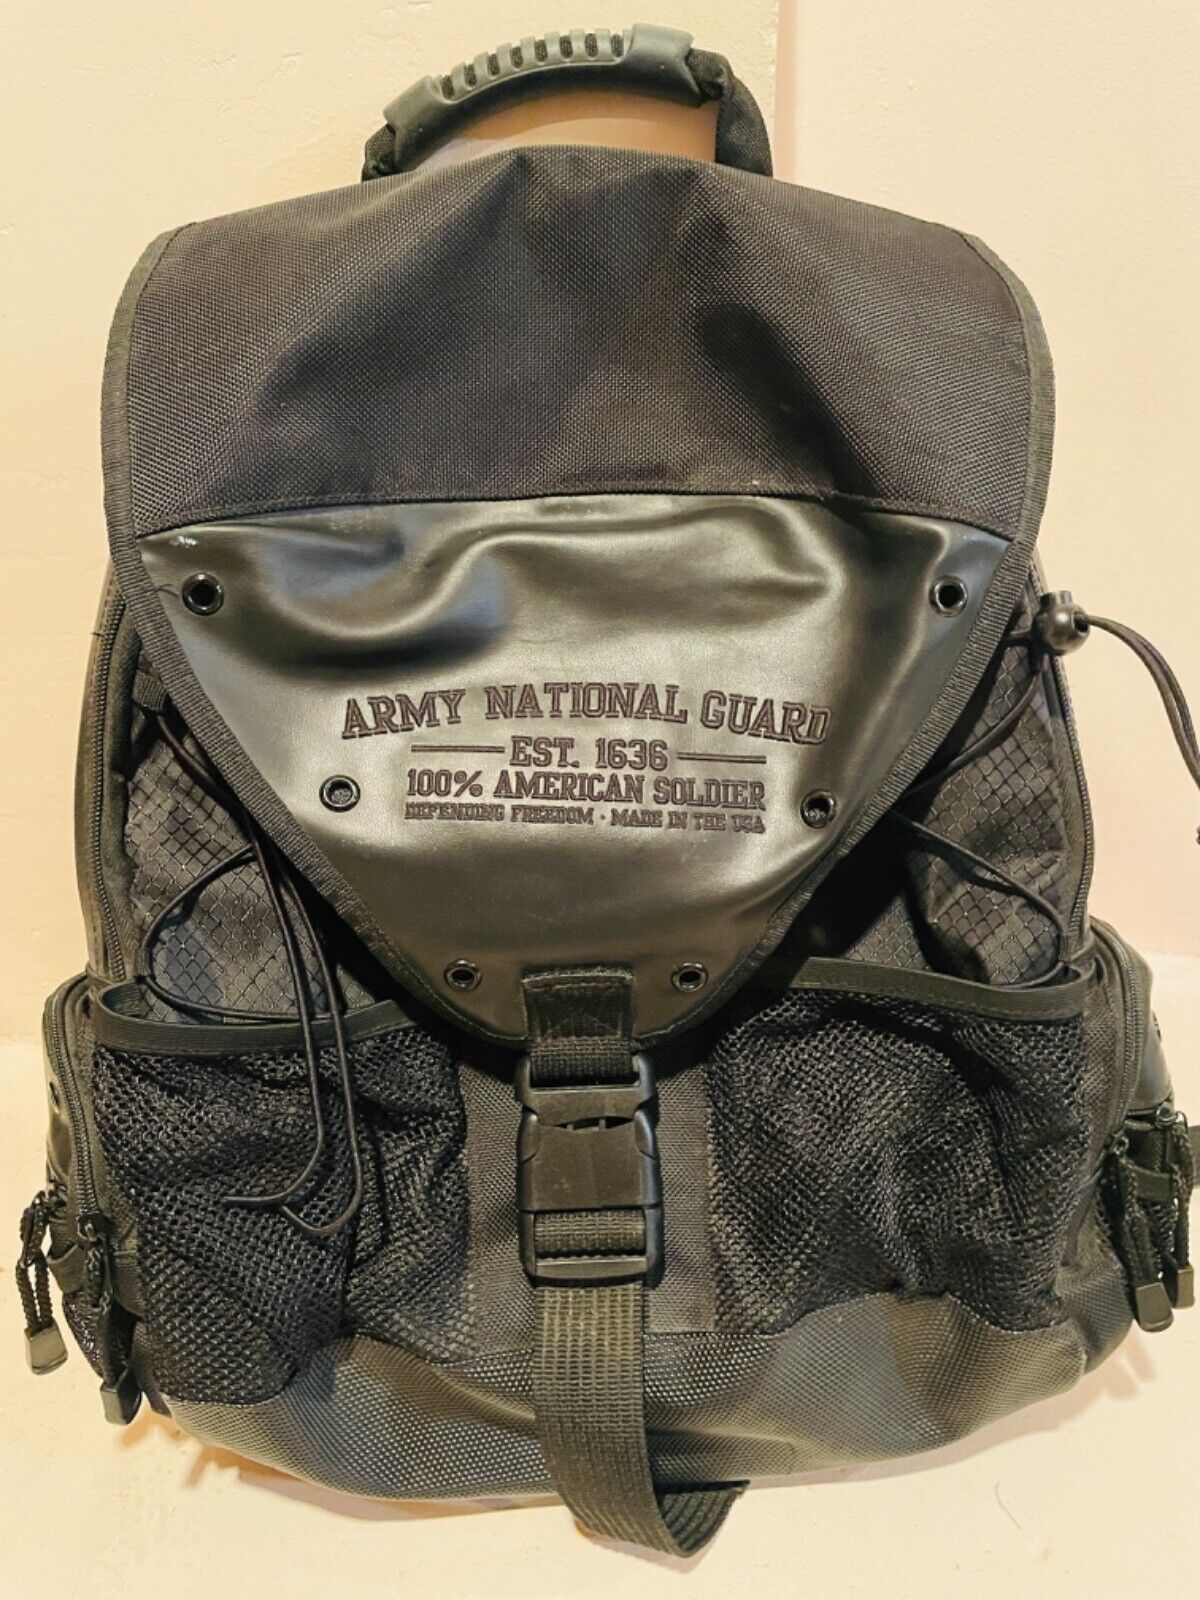 National Guard Black Tactical Backpack Daypack Laptop Bag Made in USA NWOT Army